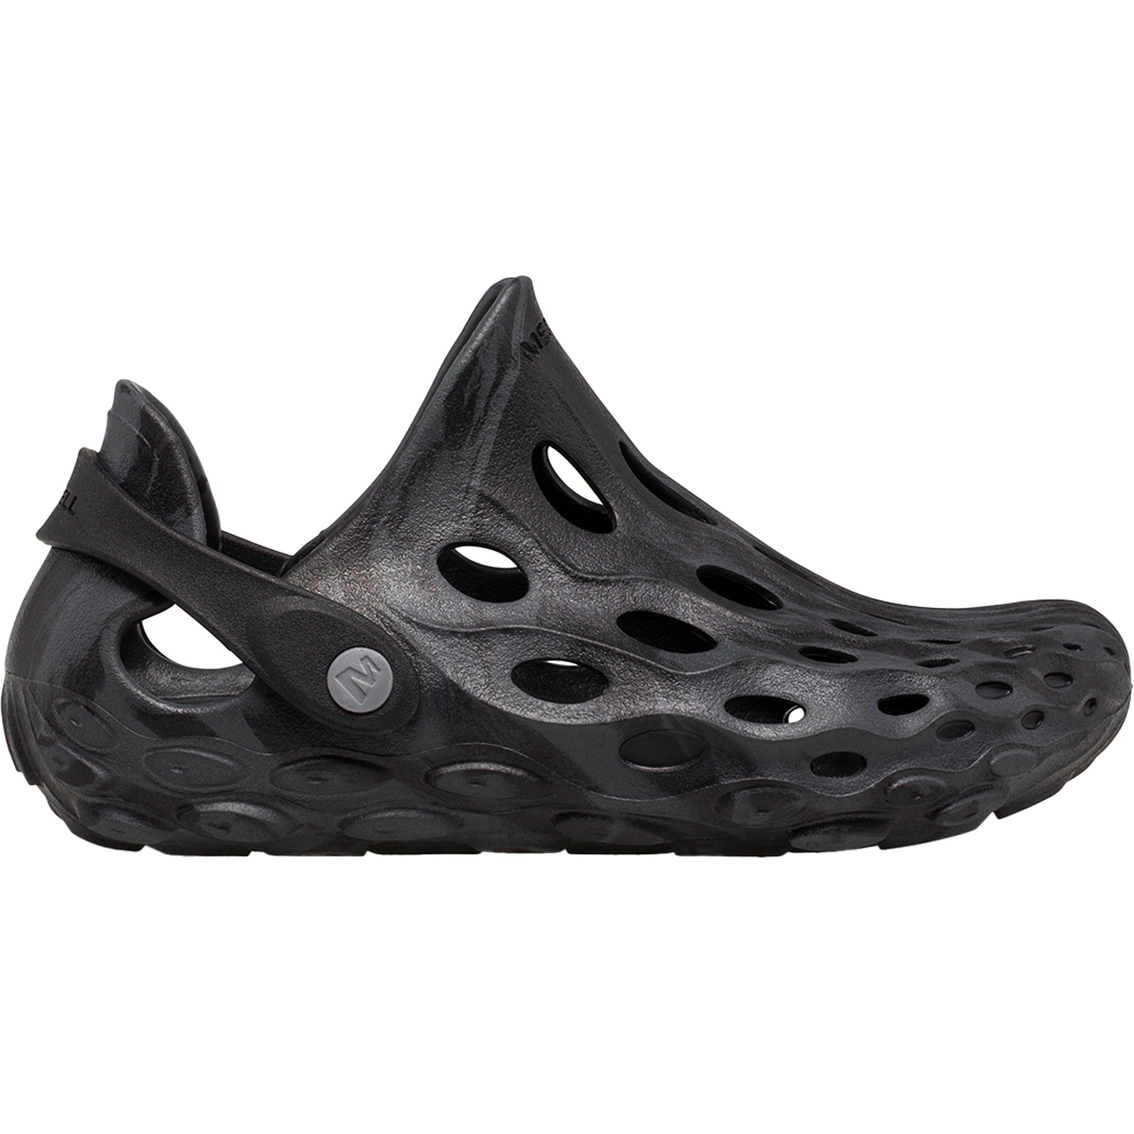 Merrell Boys Hydro Moc Water Shoes - Image 1 of 4